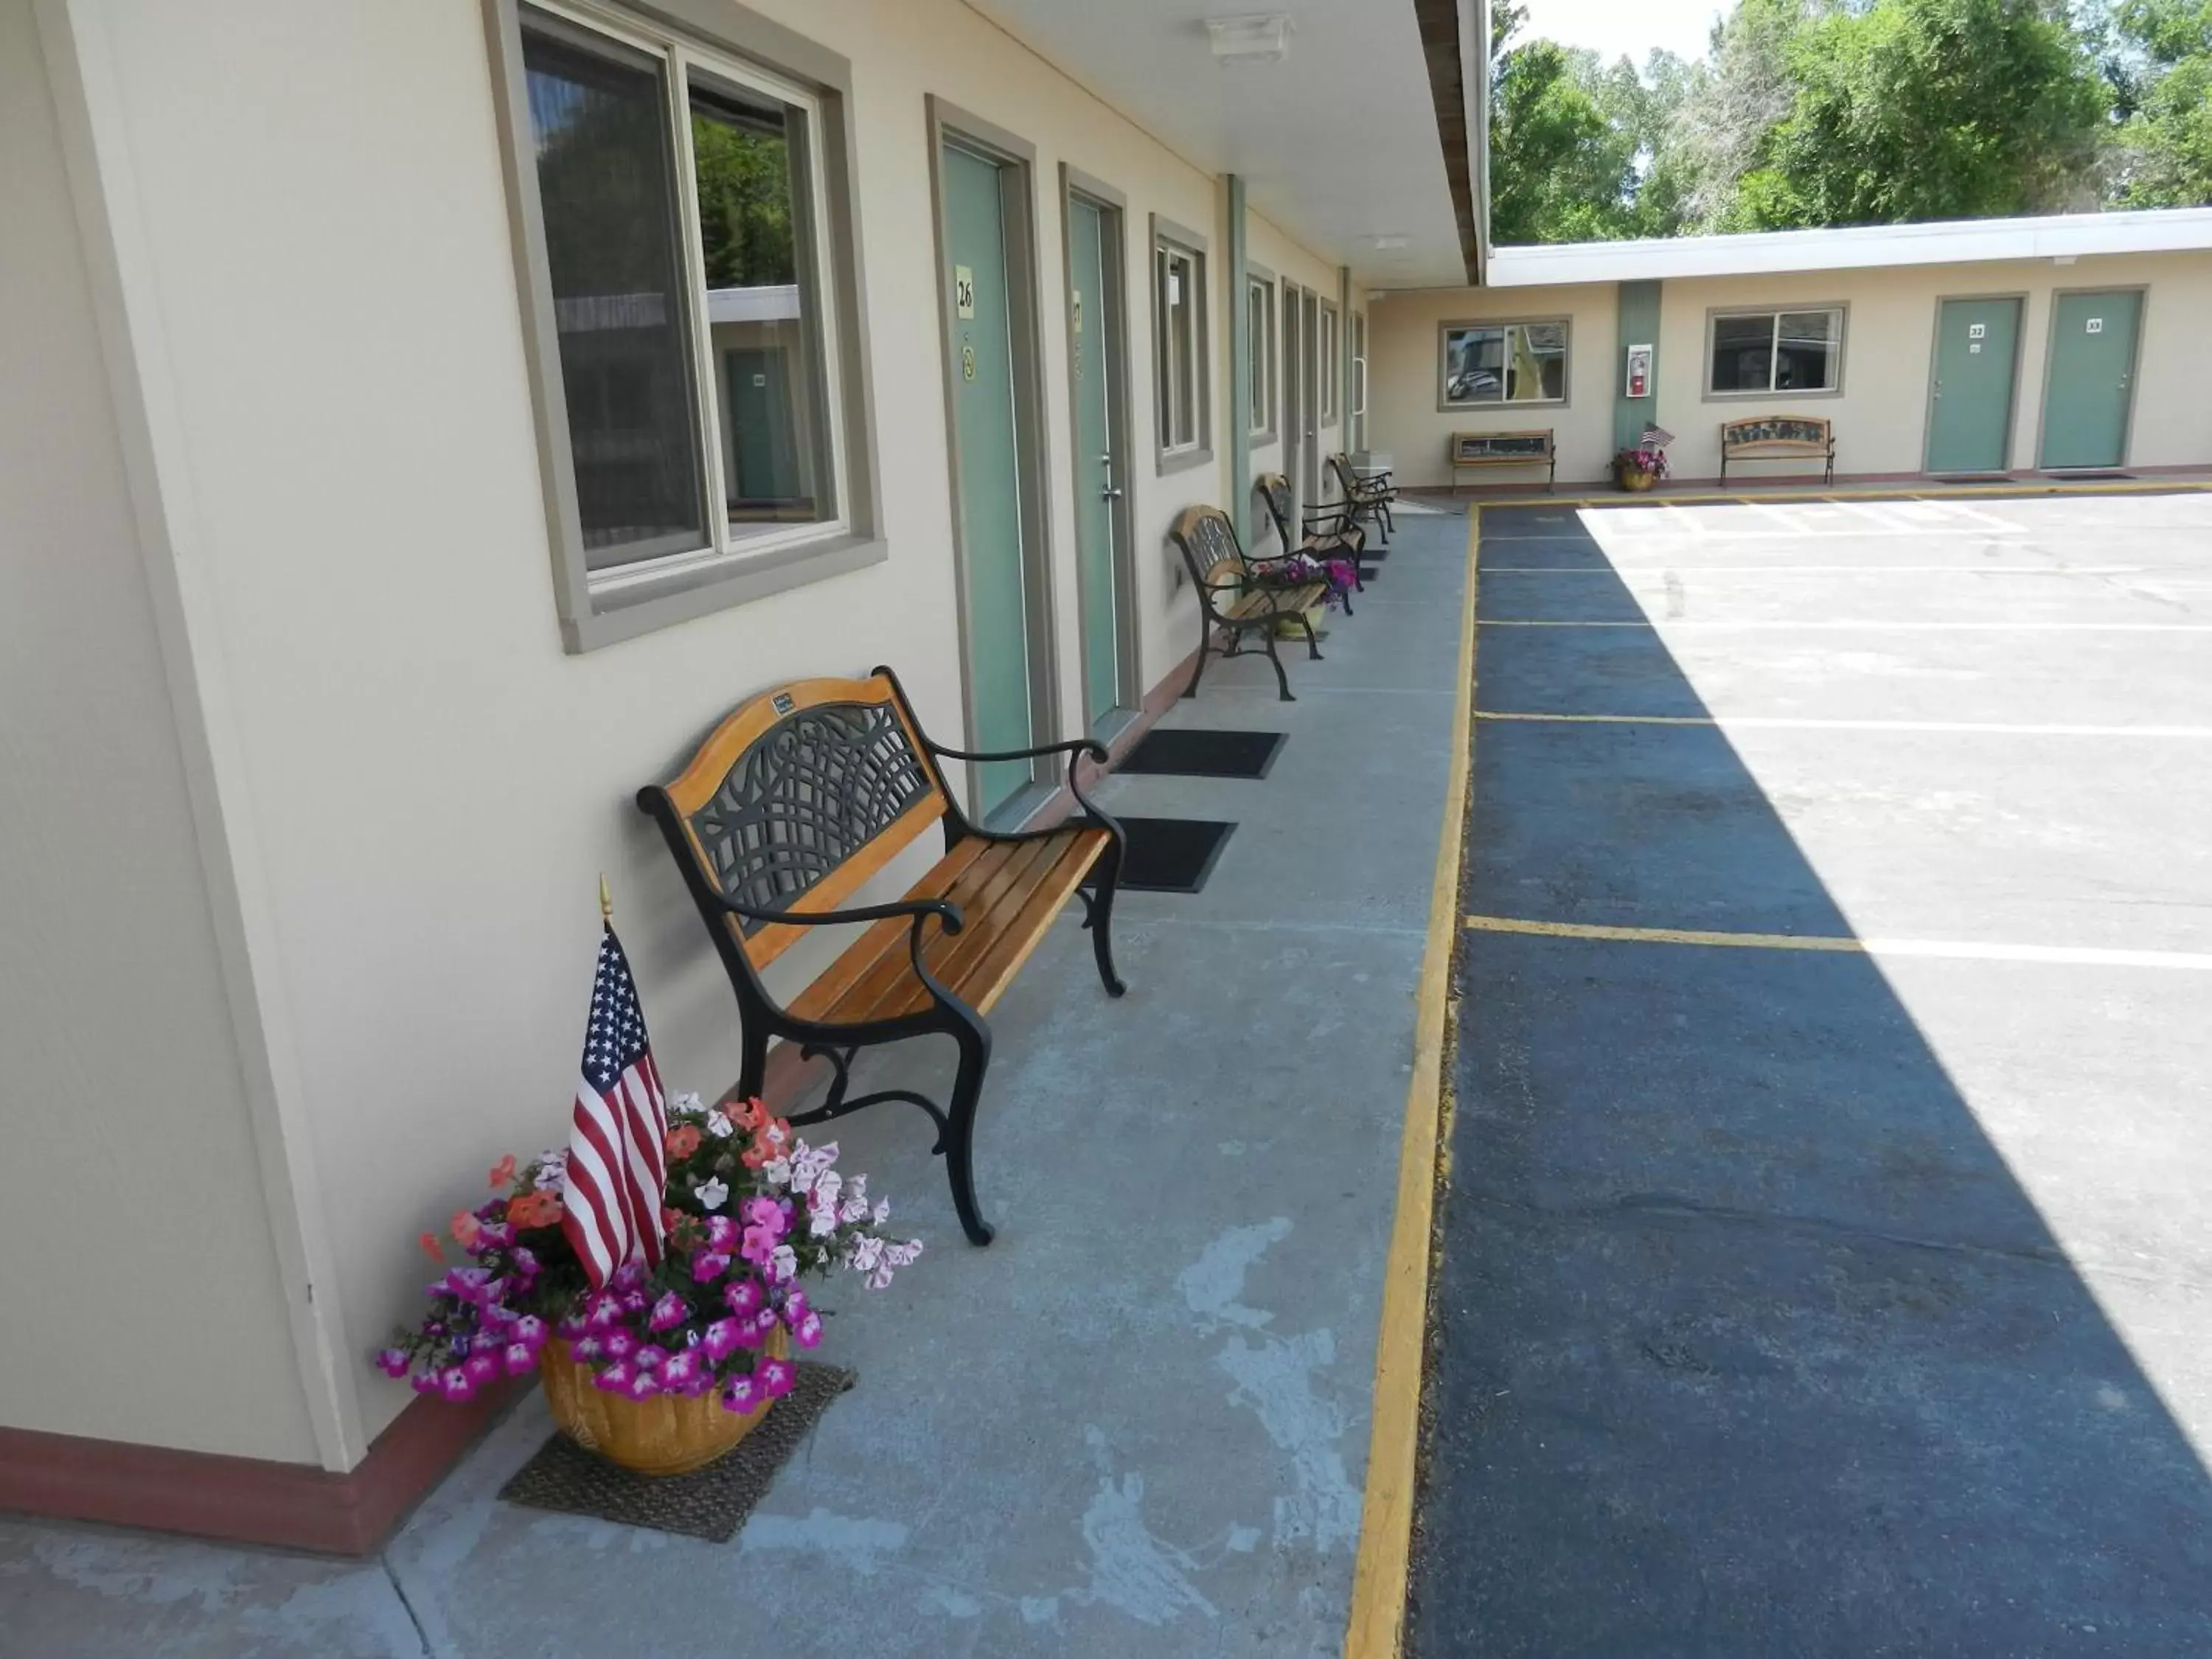 Area and facilities in Paintbrush Motel